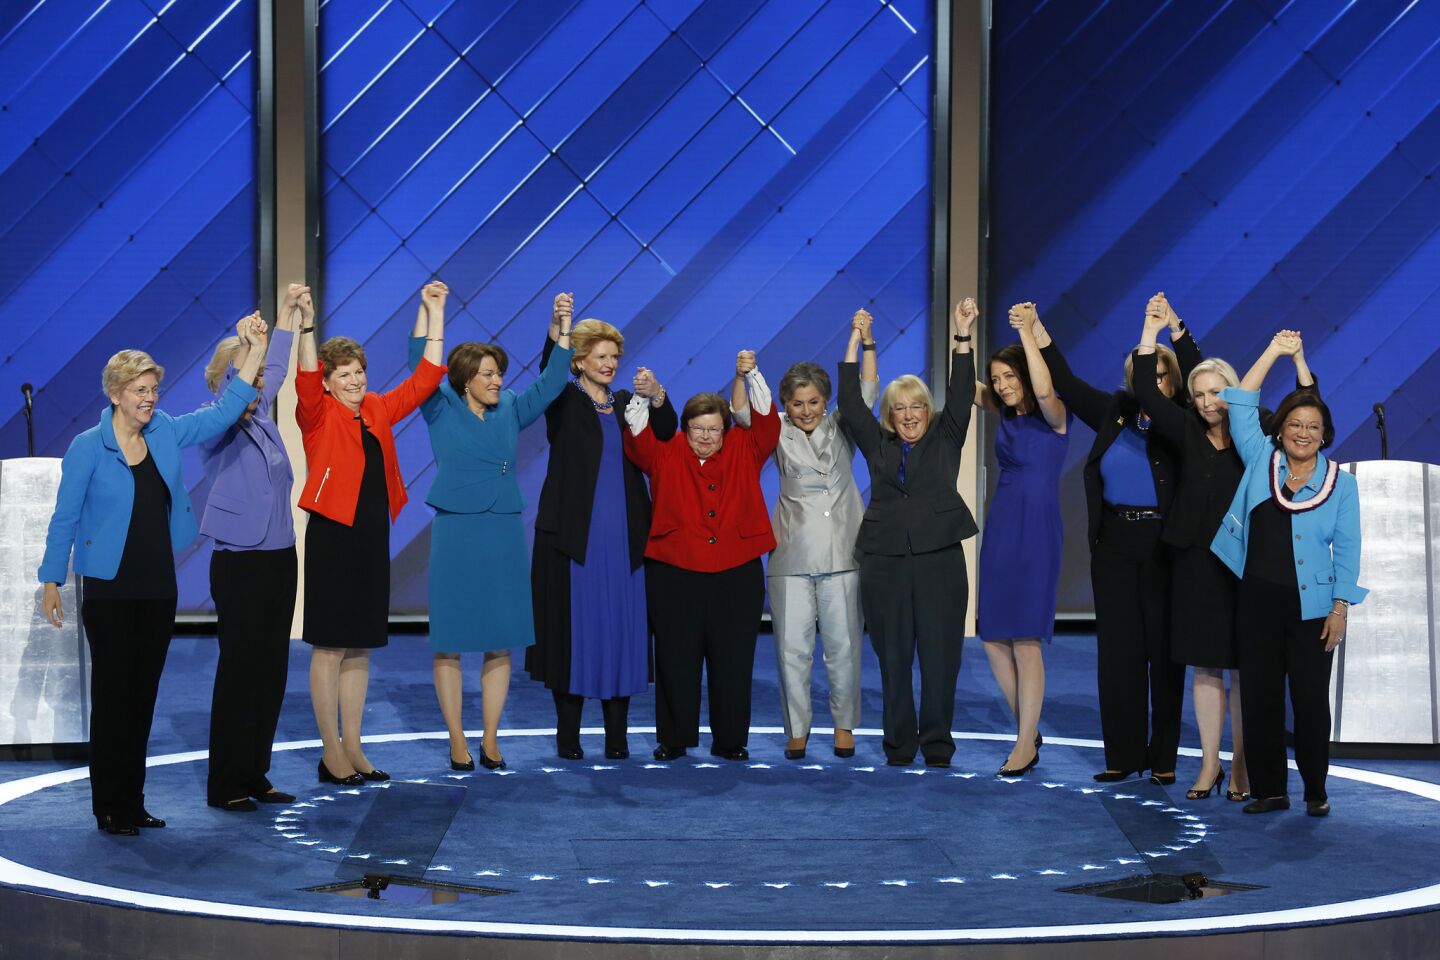 Some of the United States Senate Women appear together after speaking at the Democratic National Convention in Philadelphia.